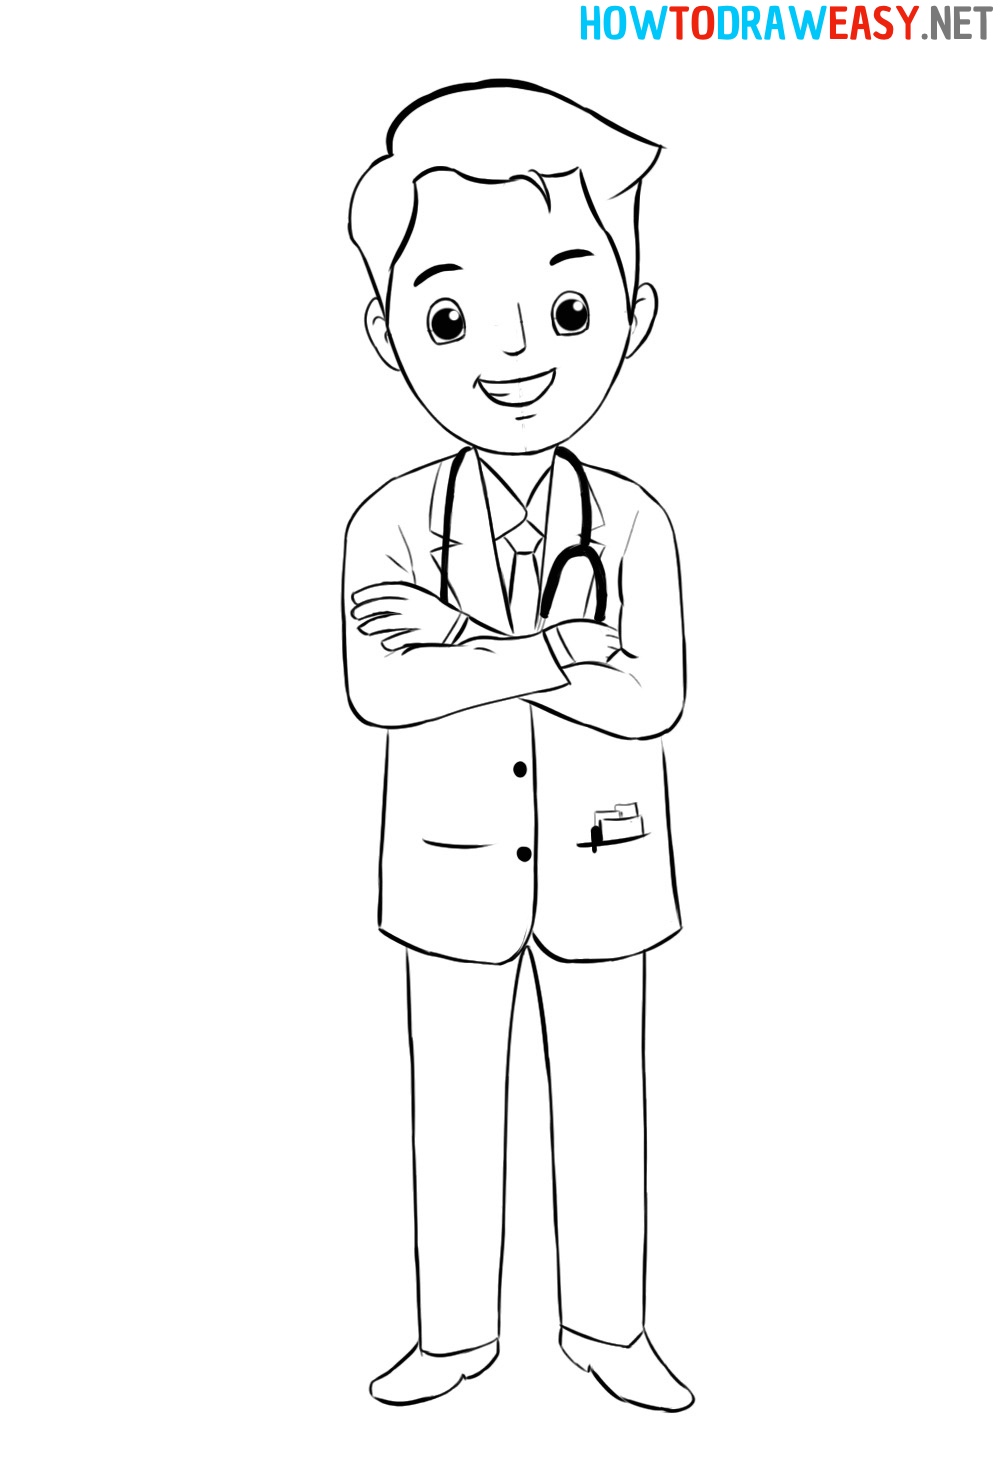 How to Draw a Doctor Easy